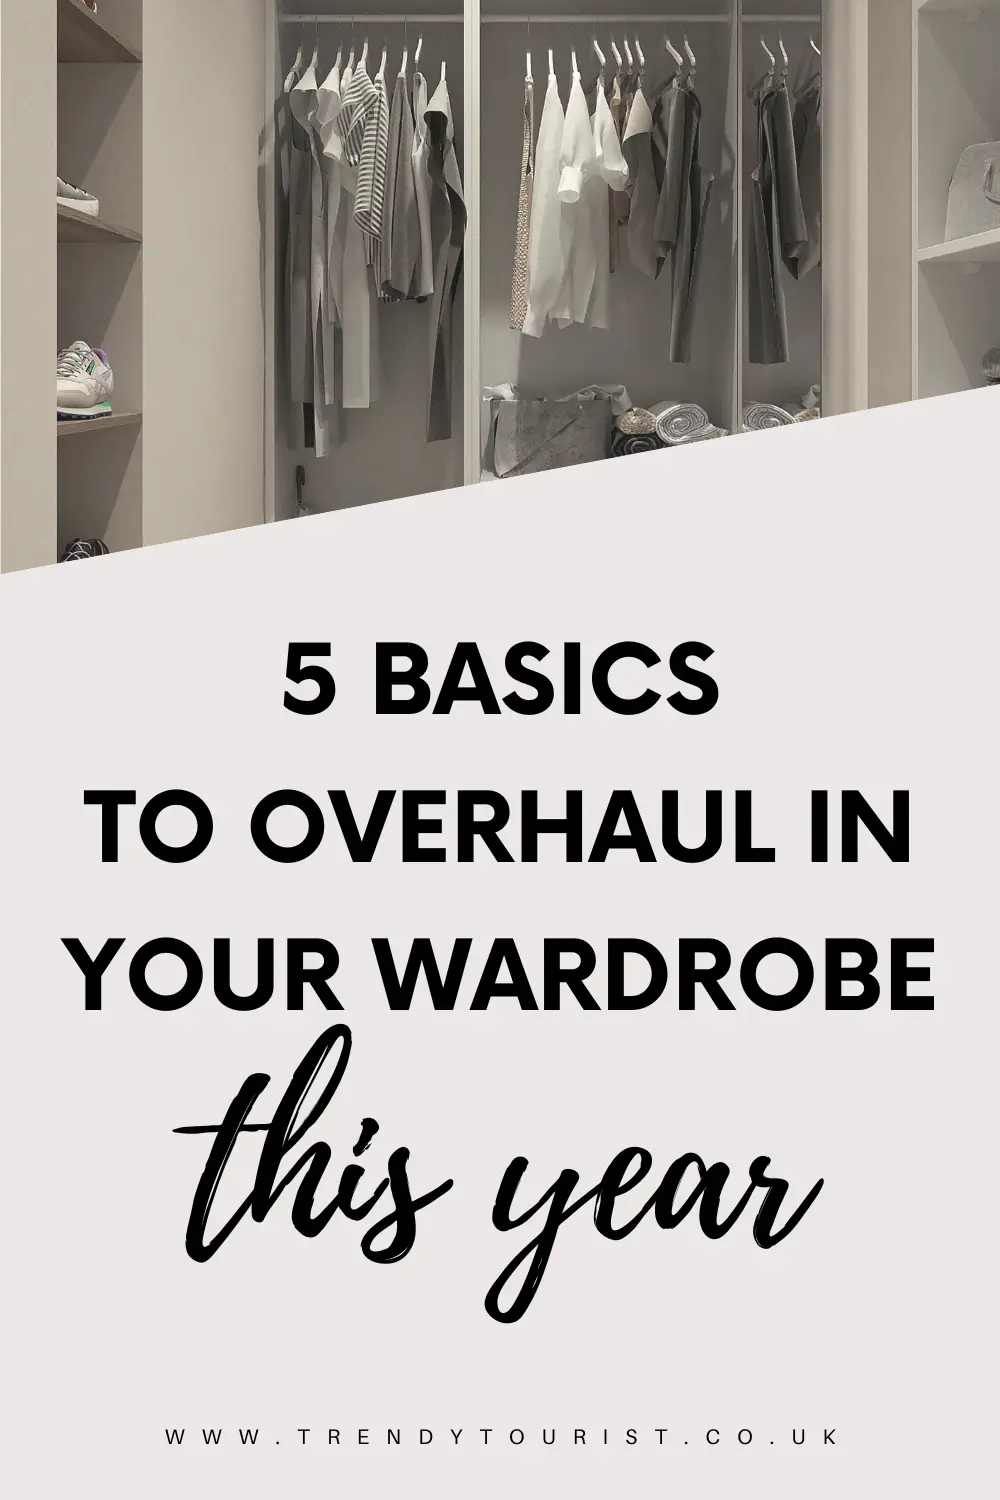 5 Basics to Overhaul In Your Wardrobe This Year